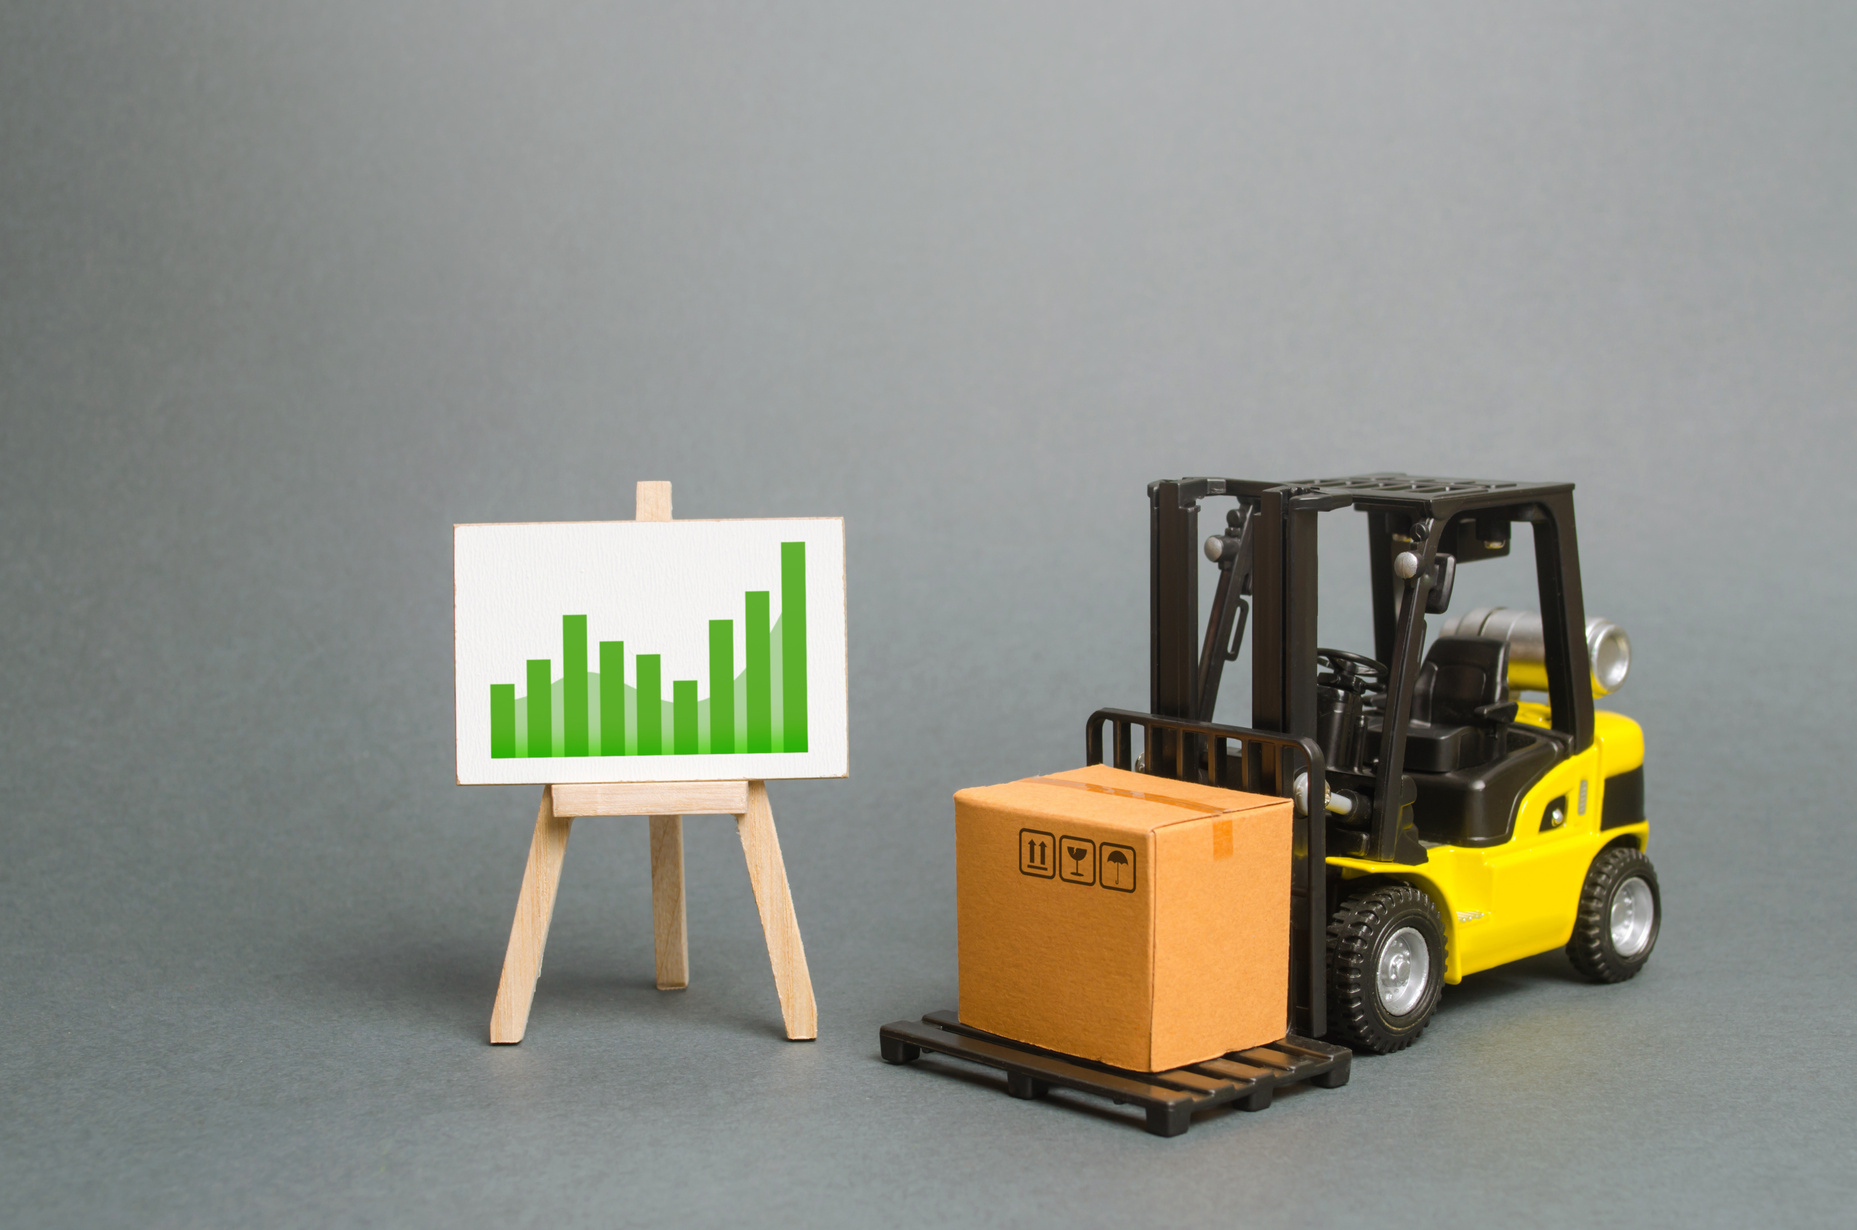 forklift truck carries a cardboard box and a sign with a positive trend. Profit growth from sales and high production of goods. Retail, resale, sales of products. Growth and stability of the economy.